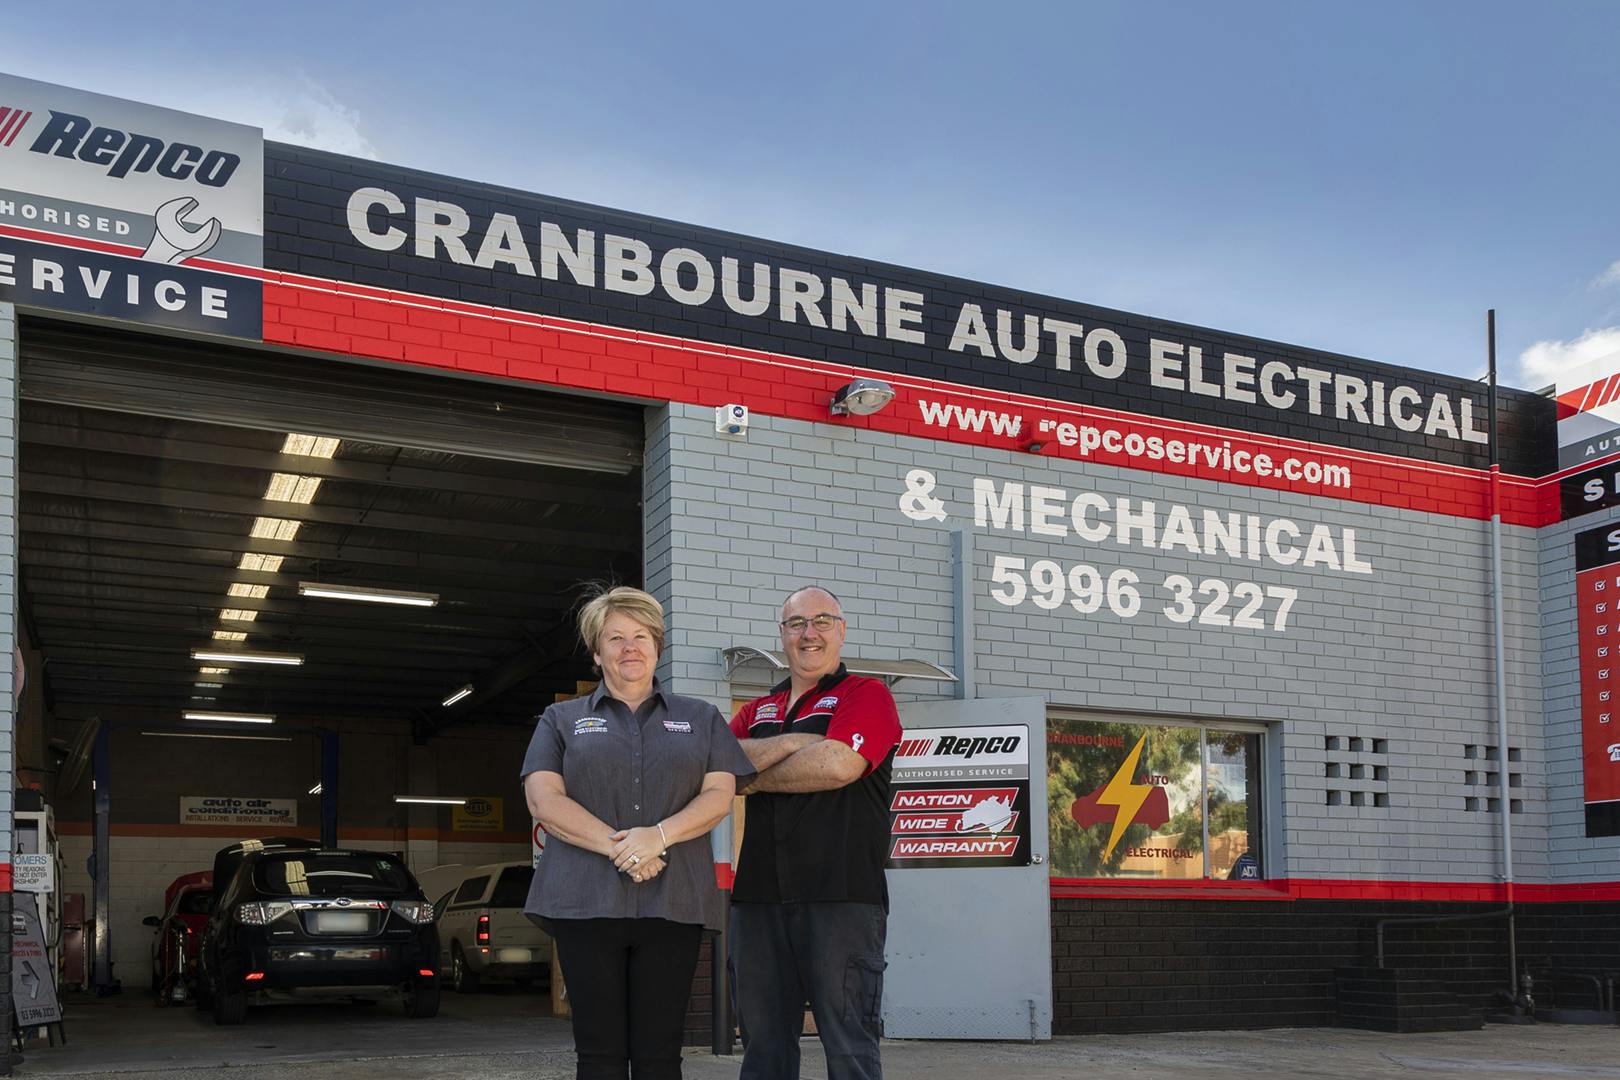 Cranbourne Auto Electrical and Mechanical profile photo